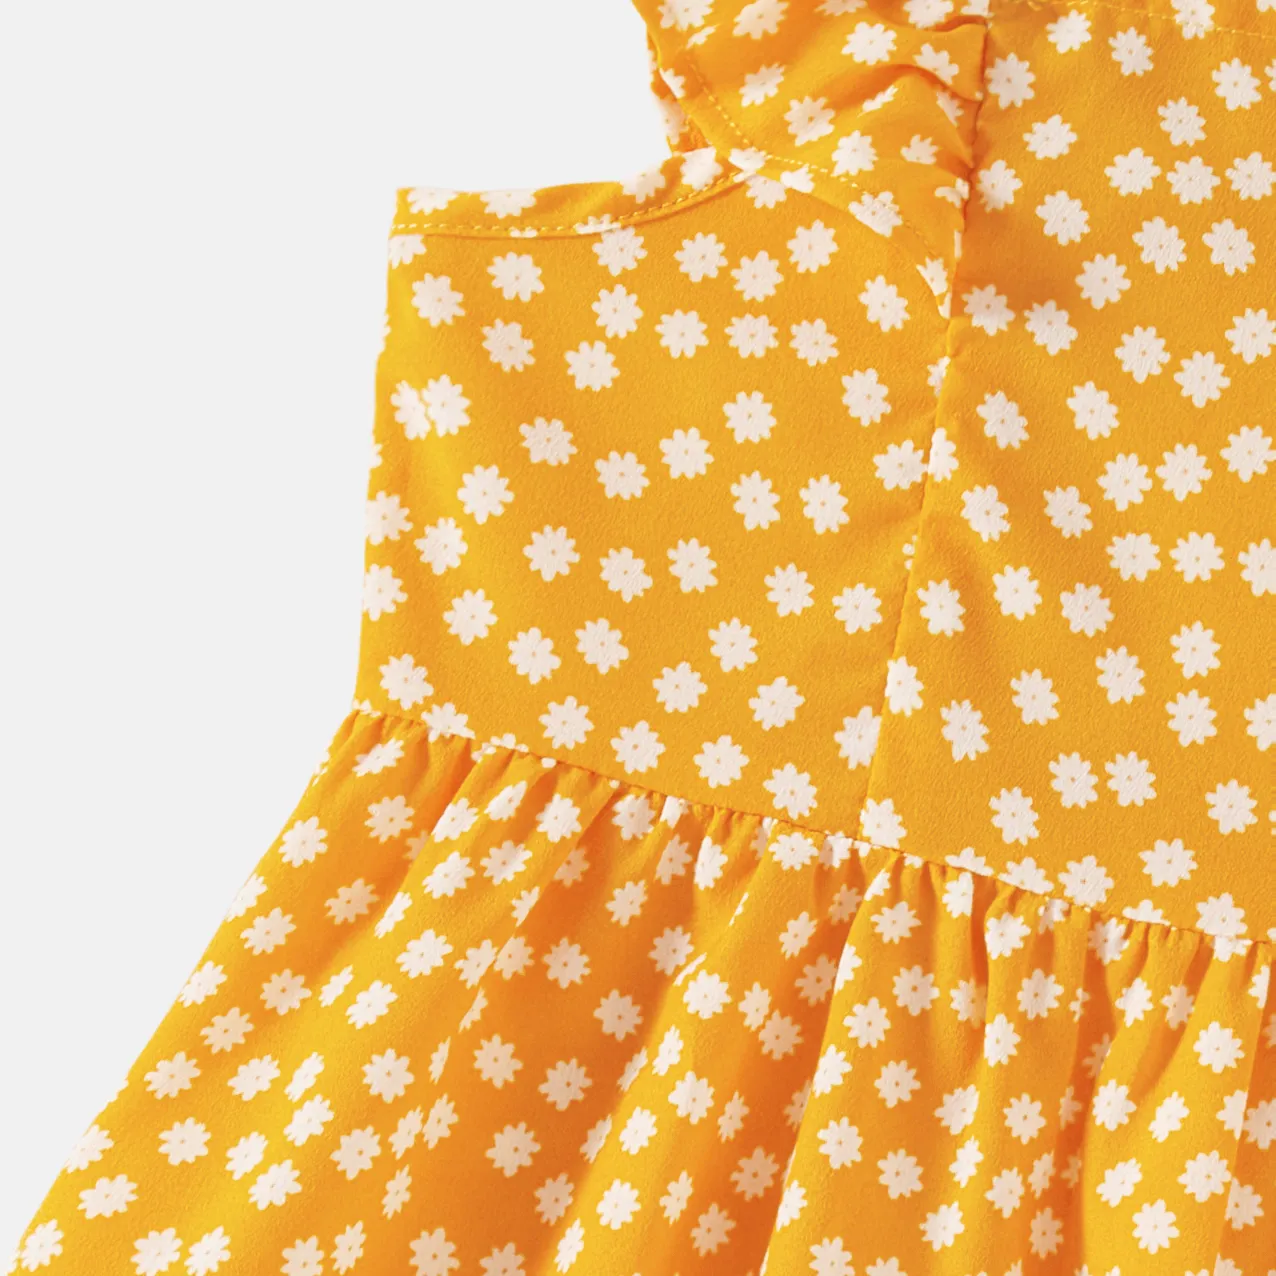 Mommy and Me Allover Print Yellow Ruffle-sleeve Button Front Dresses Yellow big image 1